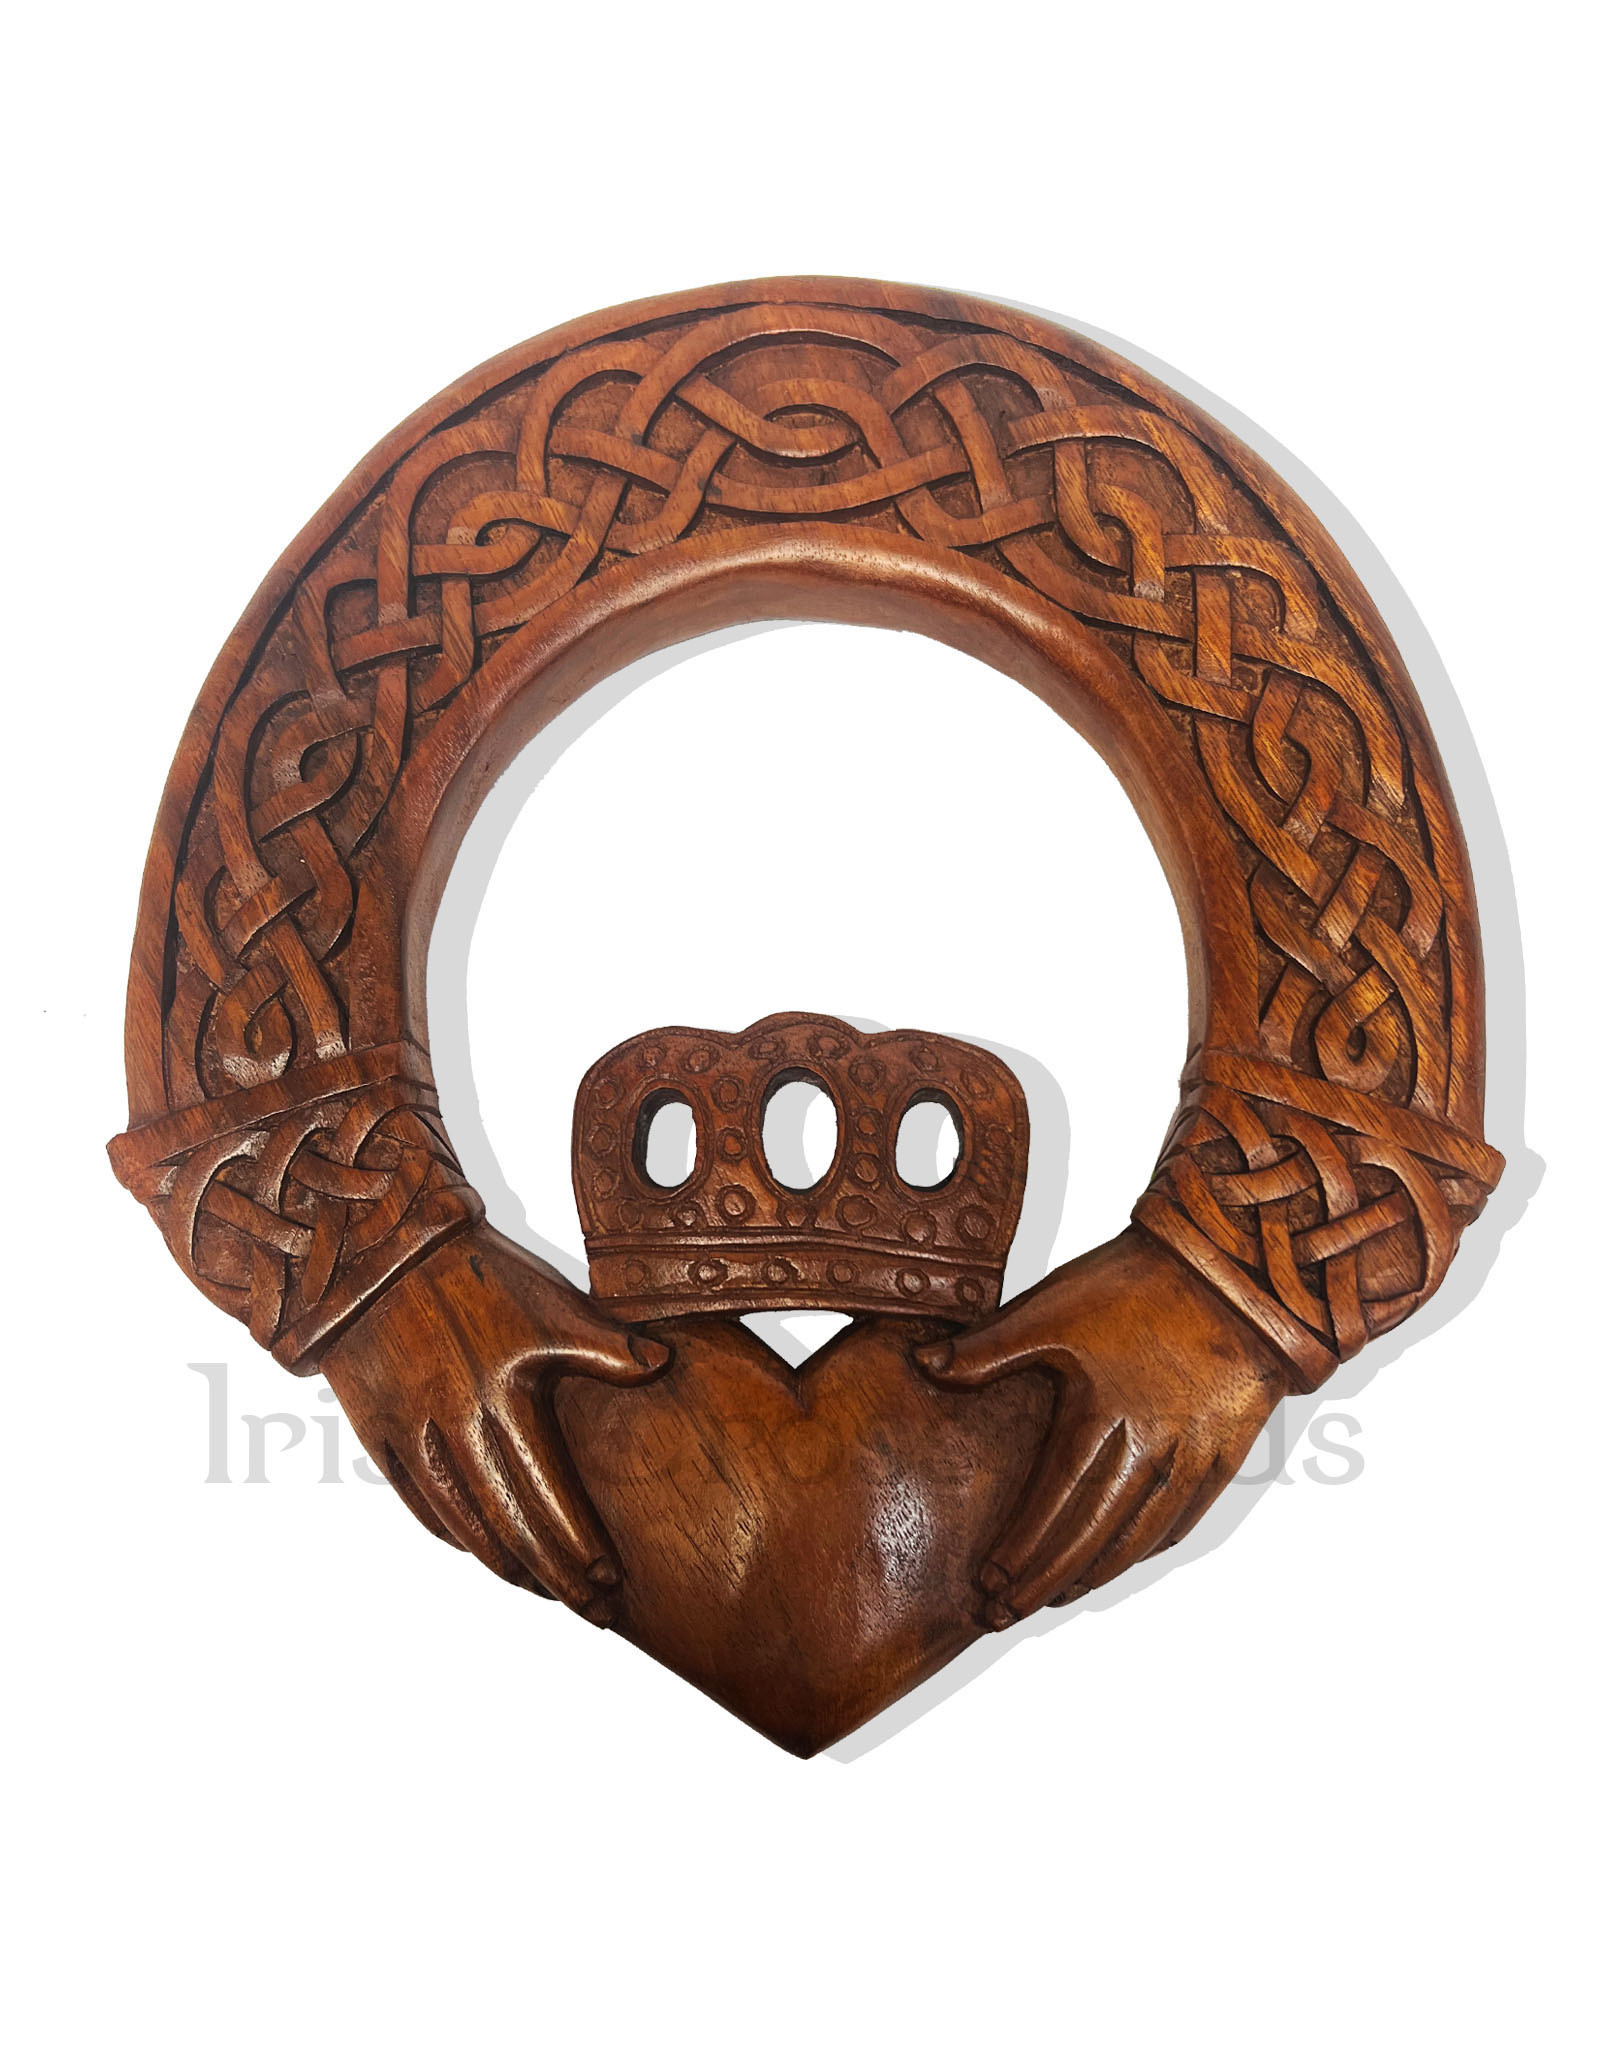 PLAQUES, SIGNS & POSTERS CELTIC WOOD CARVING - Claddagh